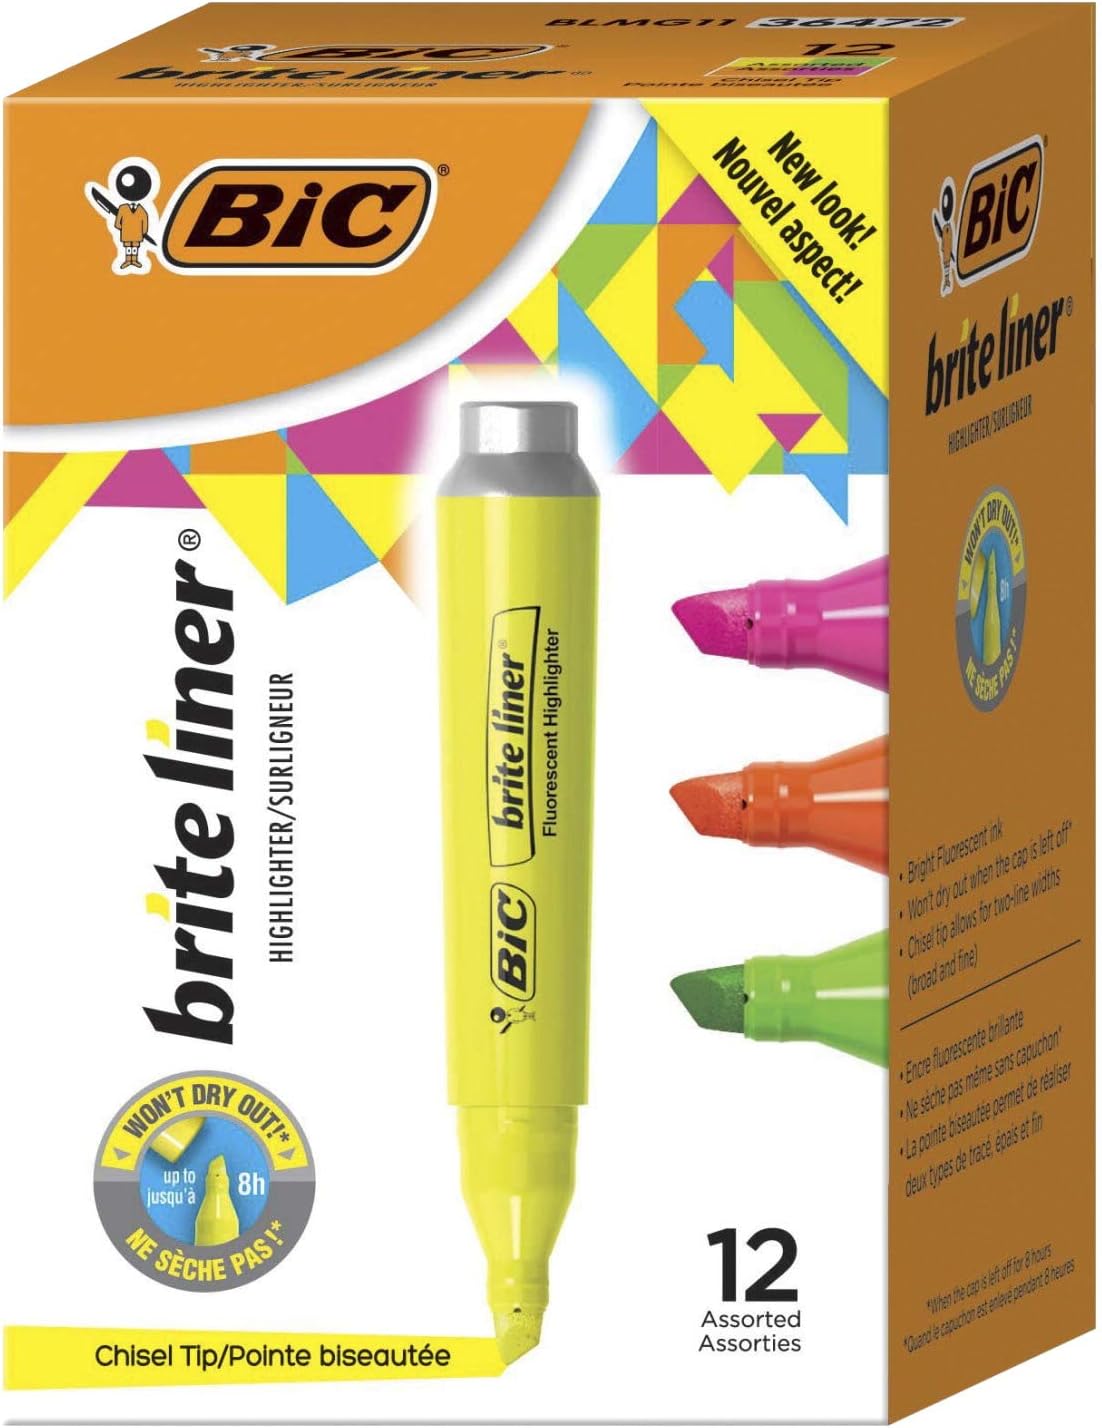 BIC Brite Liner Highlighter, Tank style, Chisel Tip, Box of 12 Assorted Fluorescent Highlighters